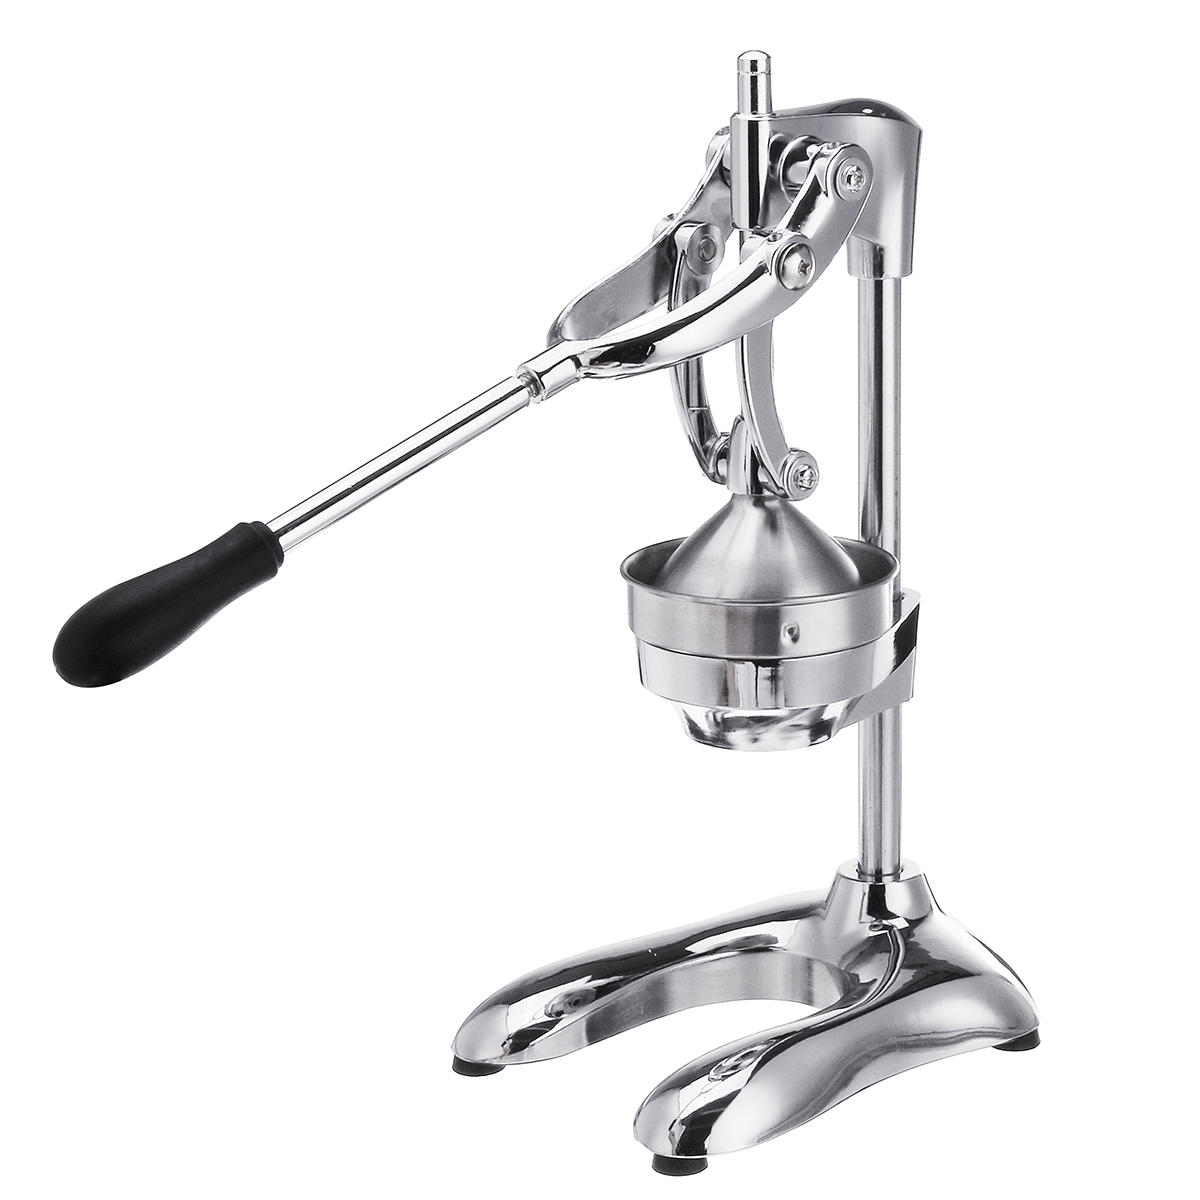 Stainless Steel Manual Hand Press Juicer Squeezer Citrus